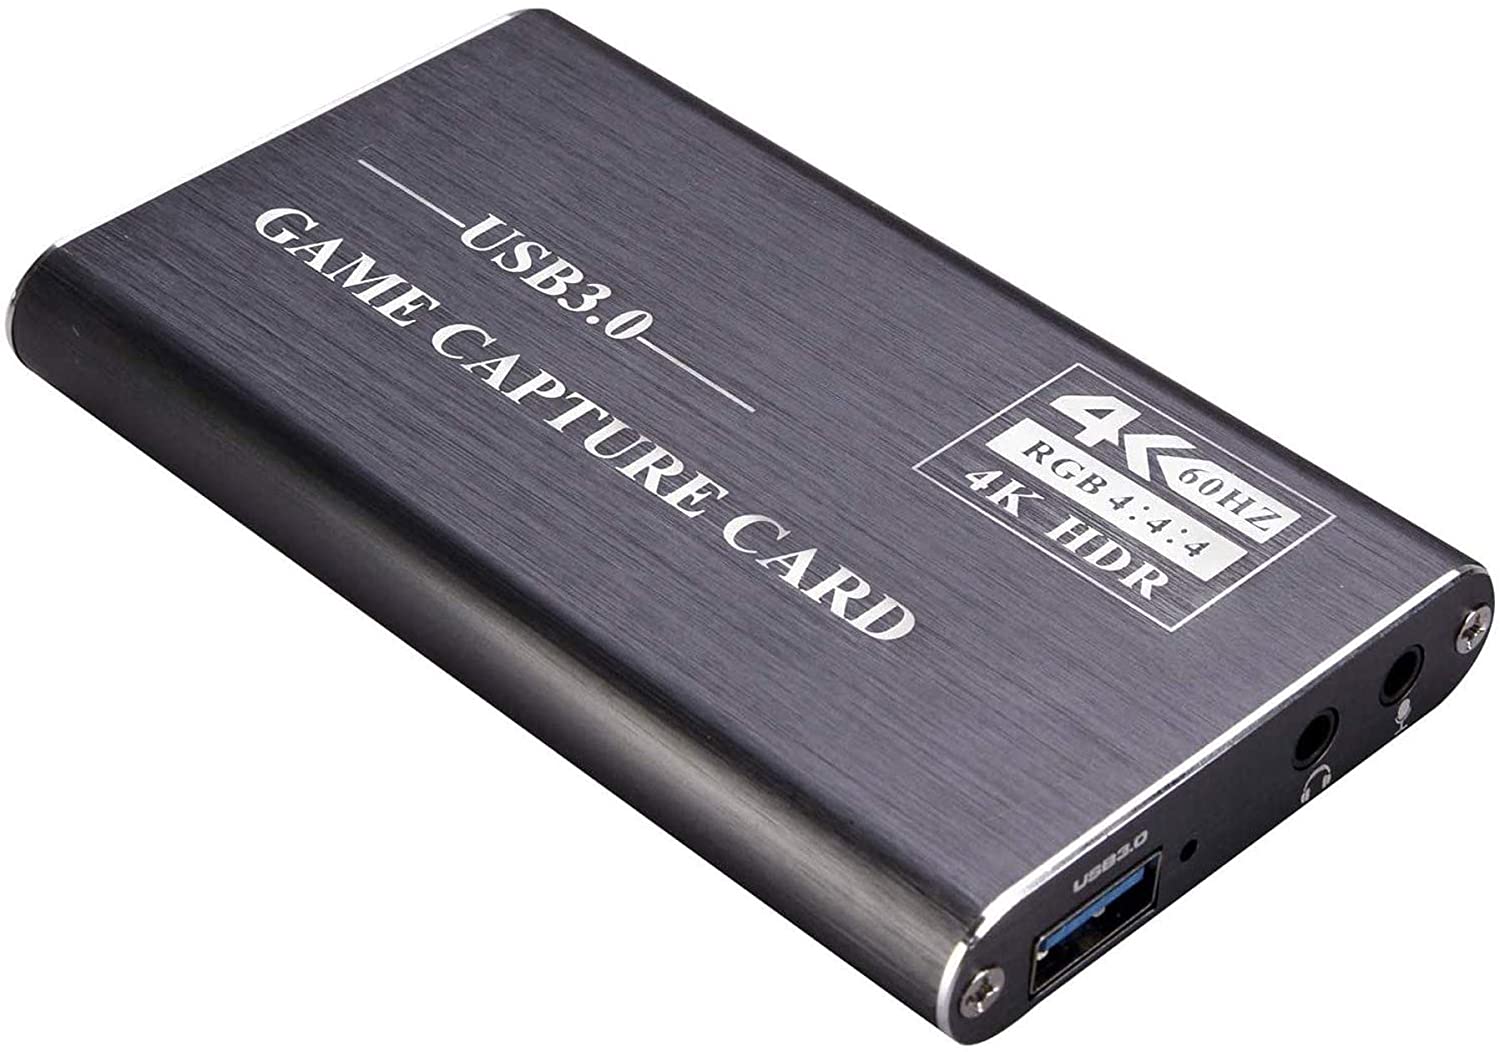 Kdely Game Capture Card, HD Video Capture Card 1080P HDMI Video Capture USB 3.0 Video Recording with Live Transmission